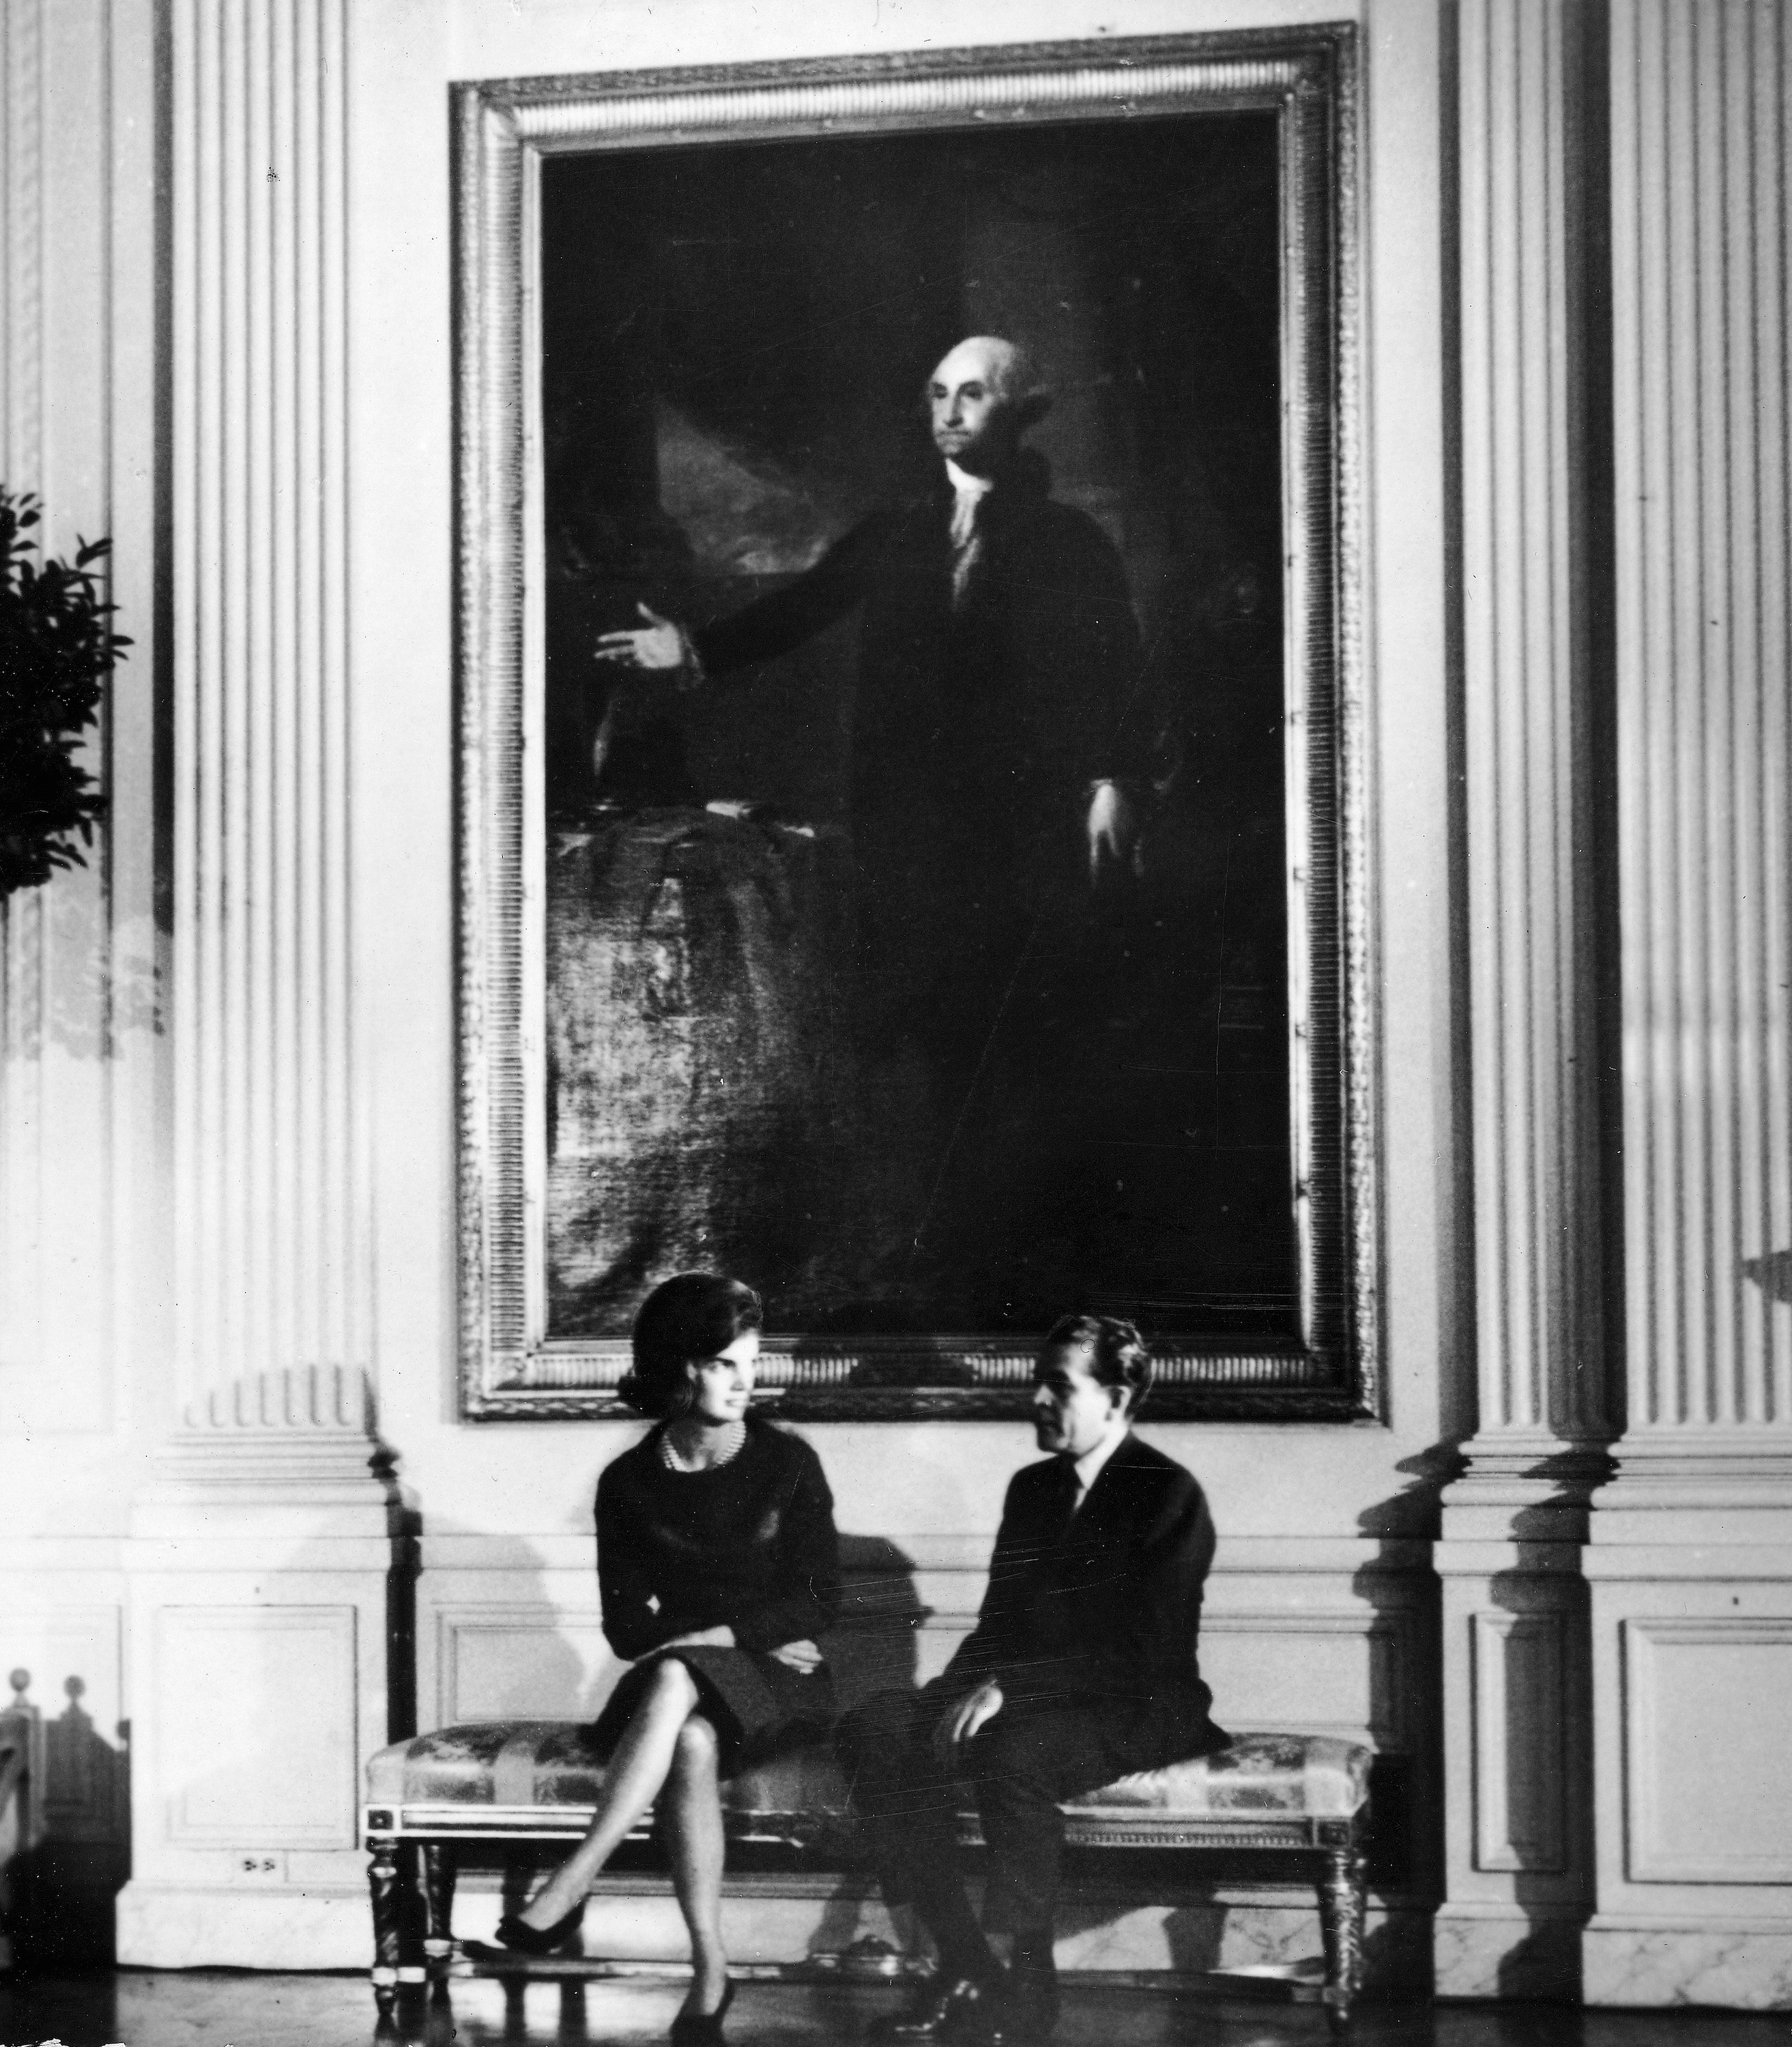 Jacqueline Kennedy and Charles Collingwood sit on a bench below the painting of President George Washington, during the televised tour of the White House